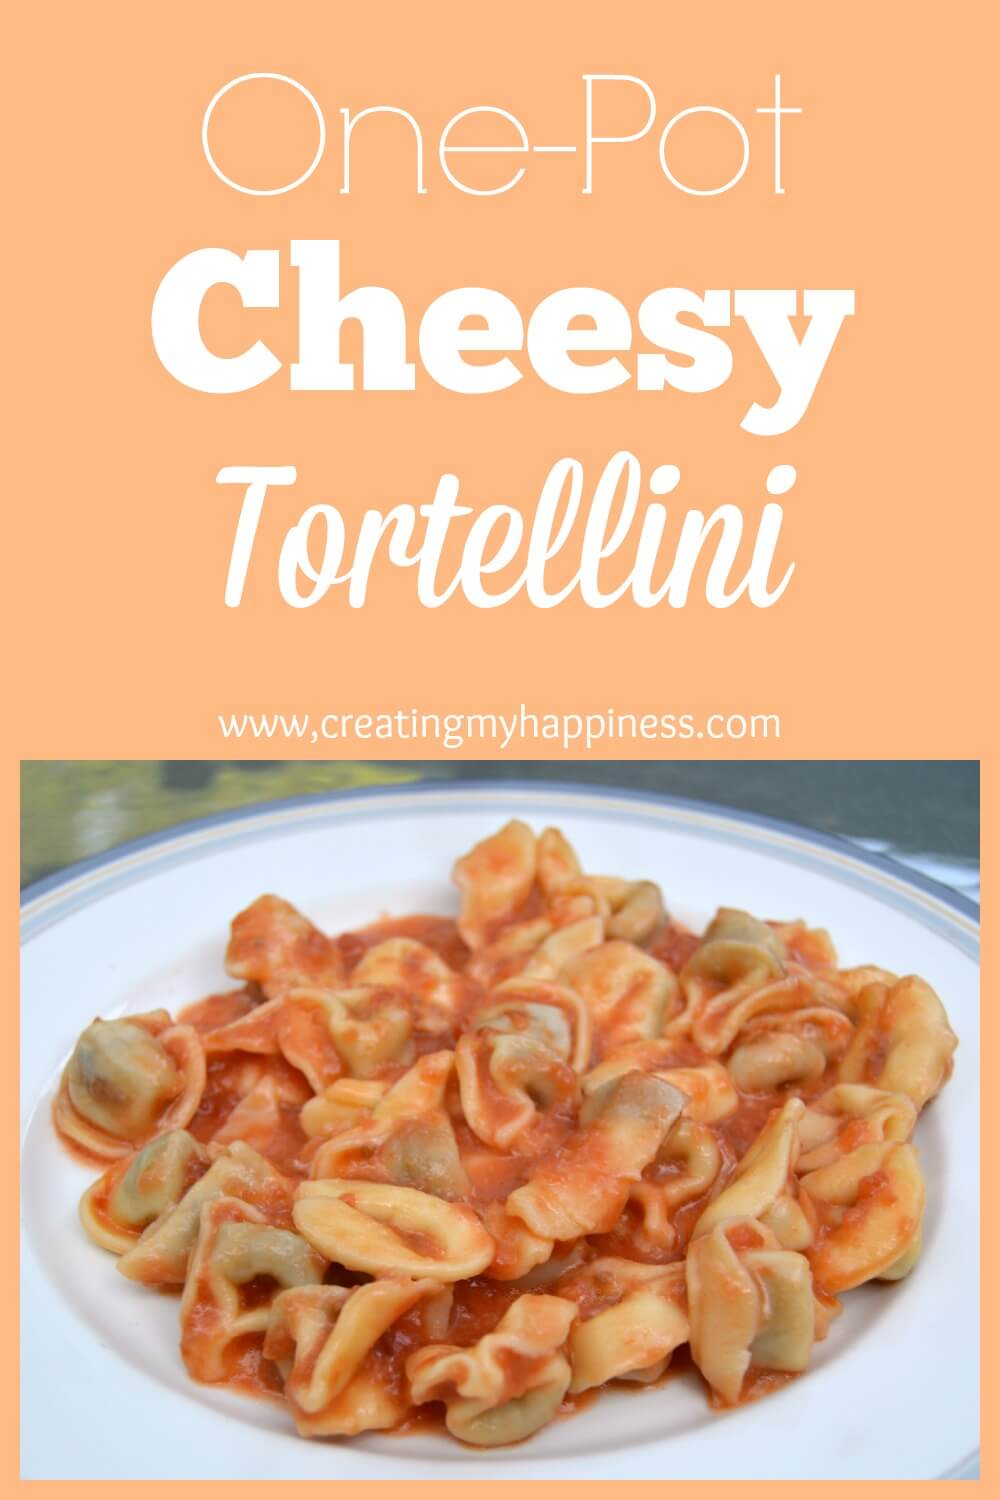 Need a simple dish to make in a jiffy? You can't do better than this one pot cheesy tortellini! Just 4 ingredients come together in less than 30 minutes!